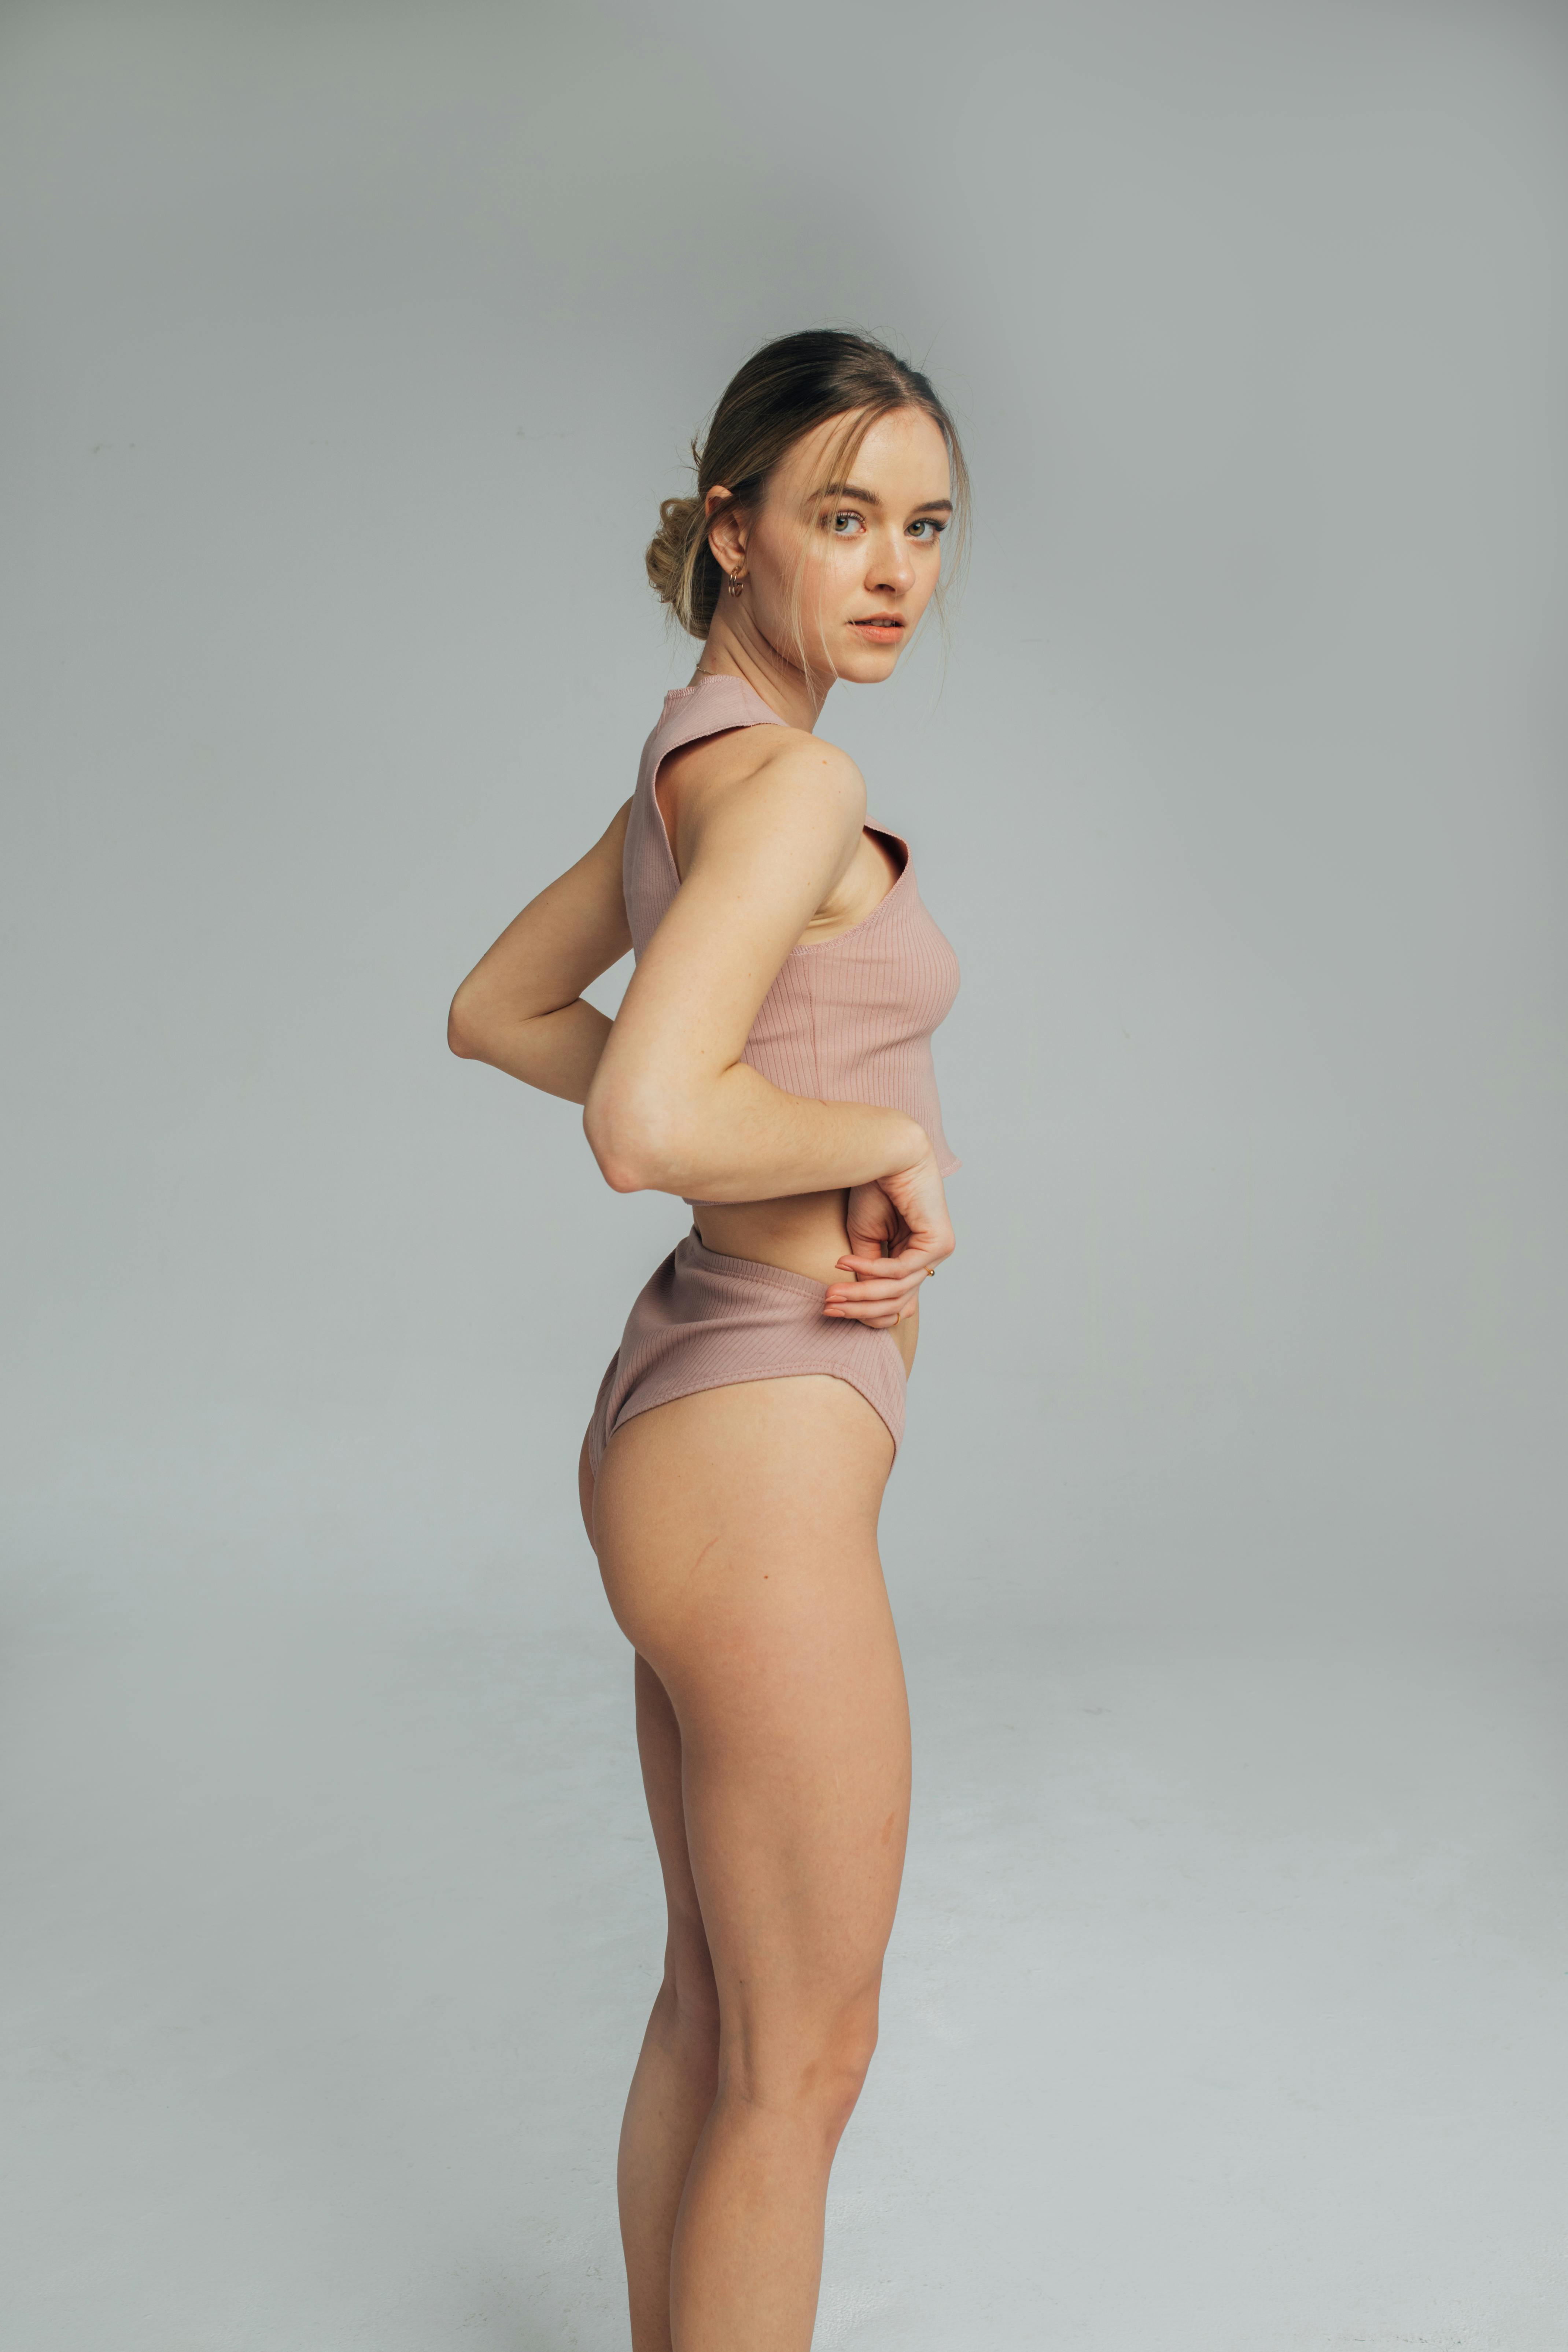 Woman In Corrective Panties, Female Body In Shapewear On Purple Background,  Studio Shot Stock Photo, Picture and Royalty Free Image. Image 155752485.